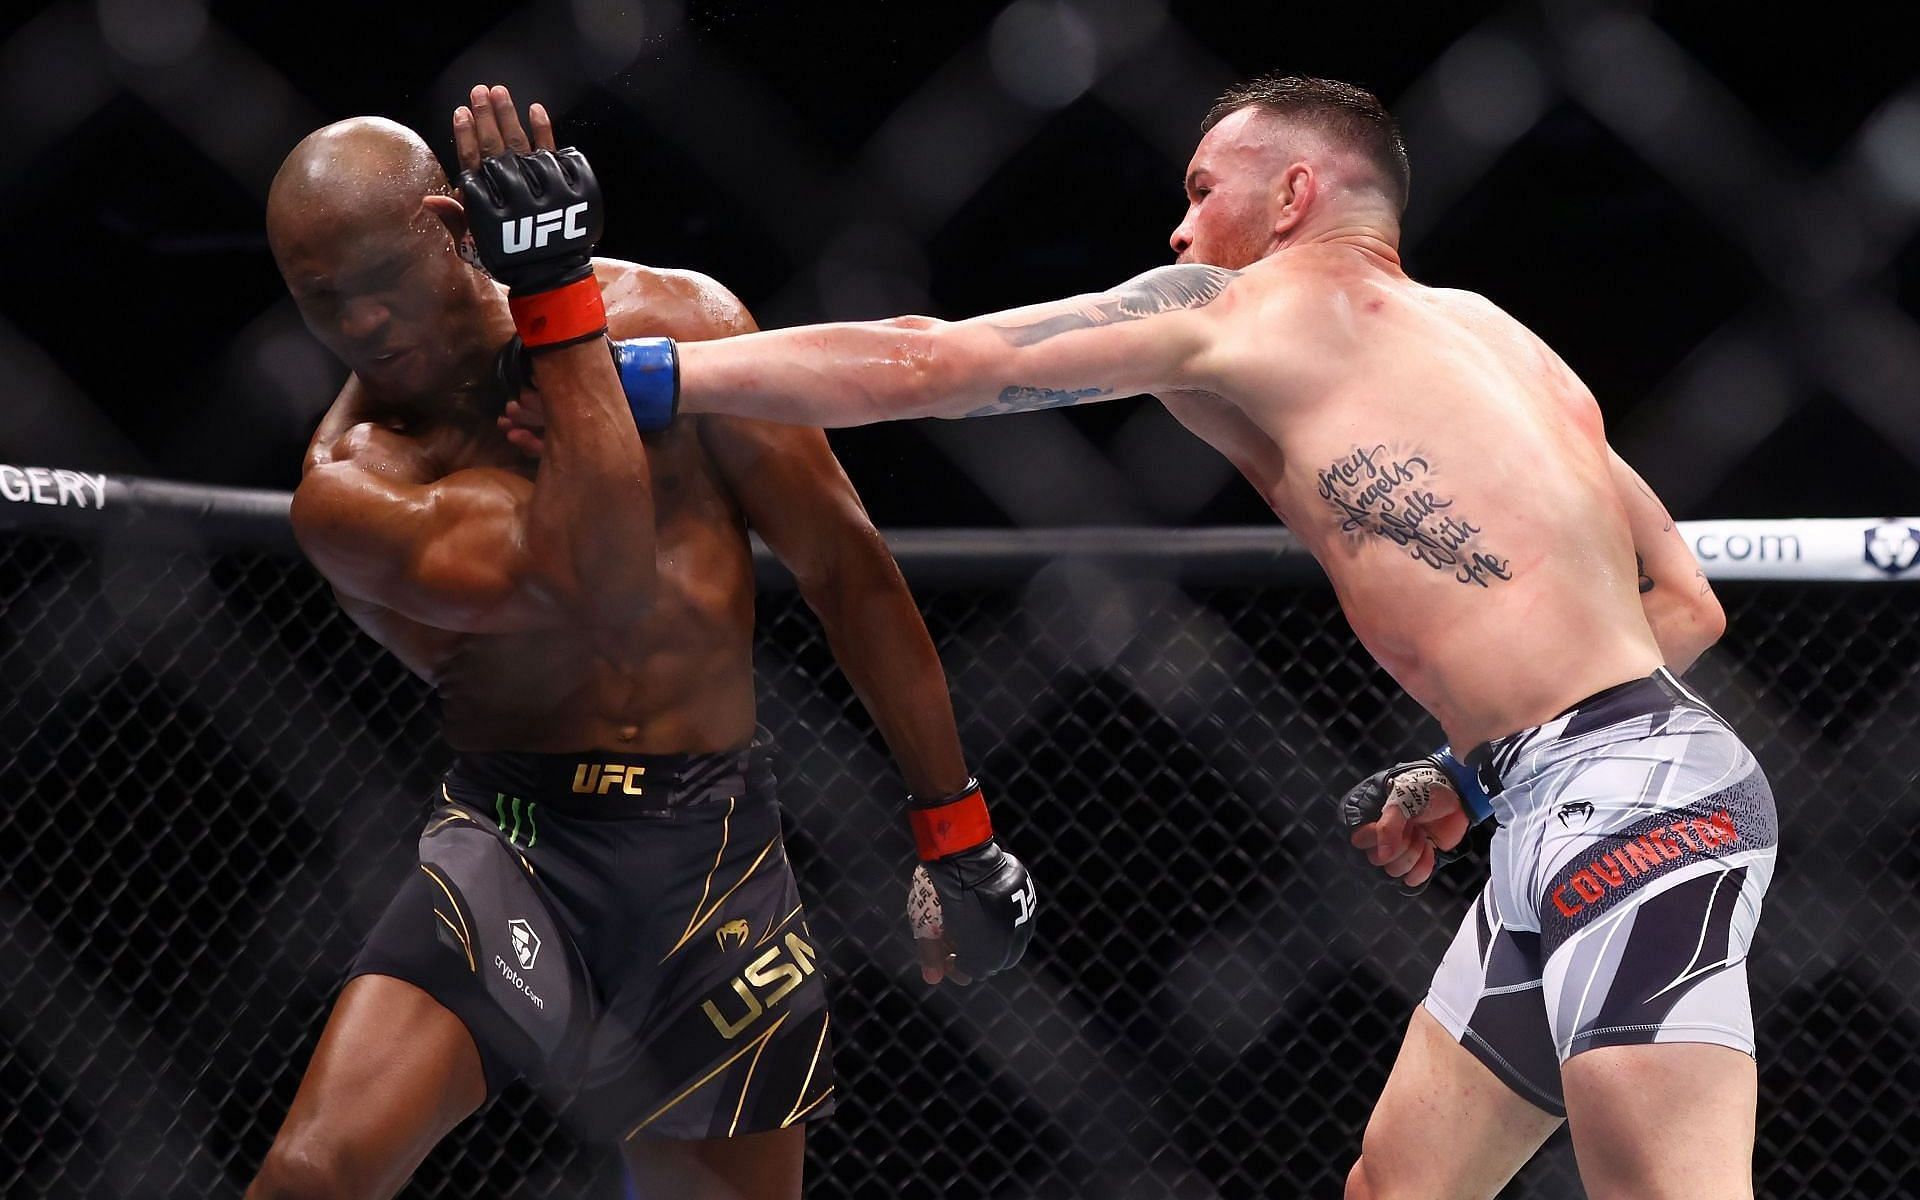 Colby Covington has suggested a best-of-seven series between himself and Kamaru Usman